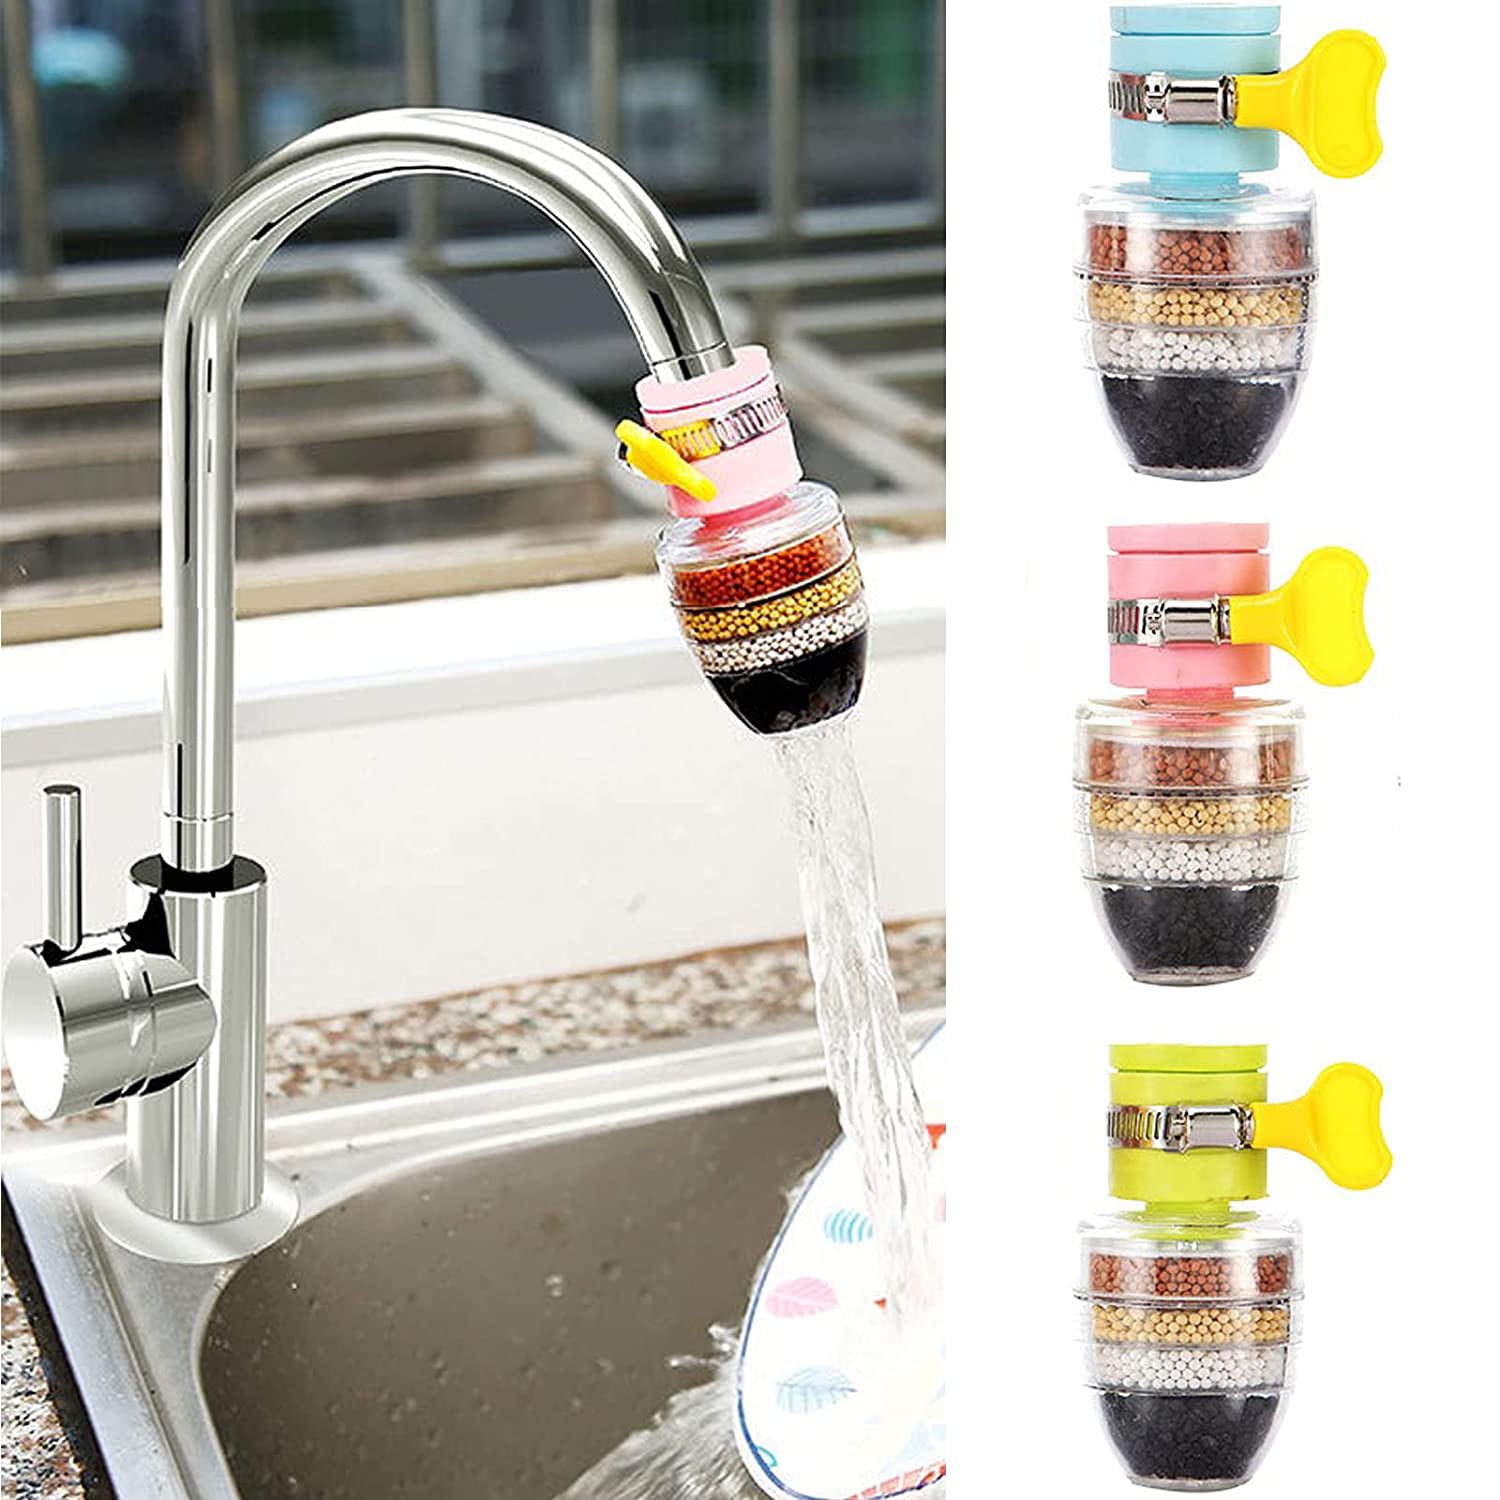 Tap Water Clean Purifier Faucet Filter Home Household Cartridge Kitchen 21-23mm SODIAL R 